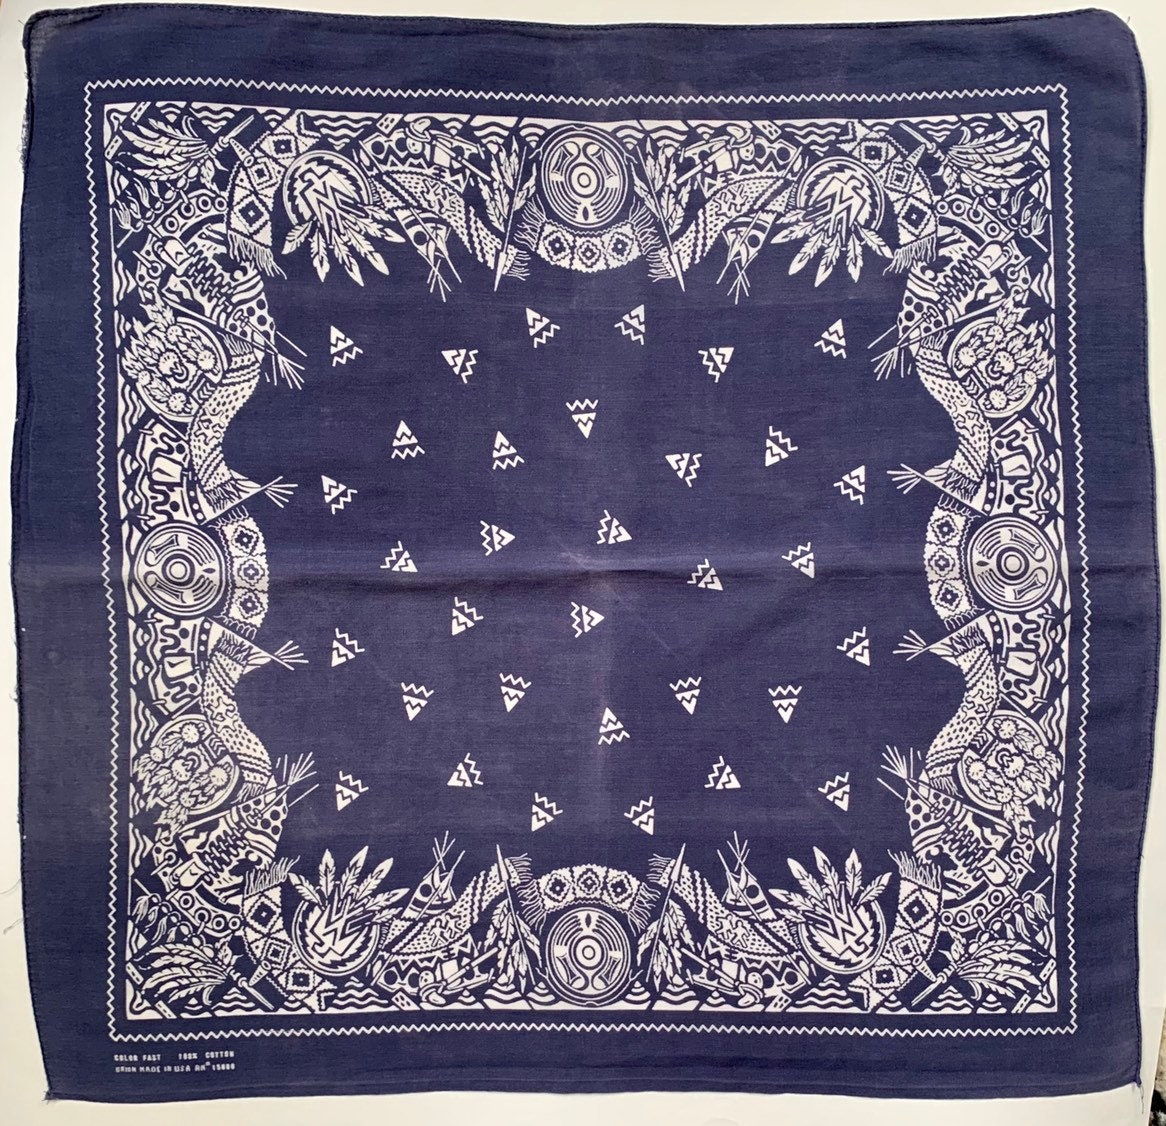 Rare Union Made Bandana Vintage 40s 50s Collectible Color Fast Made in ...